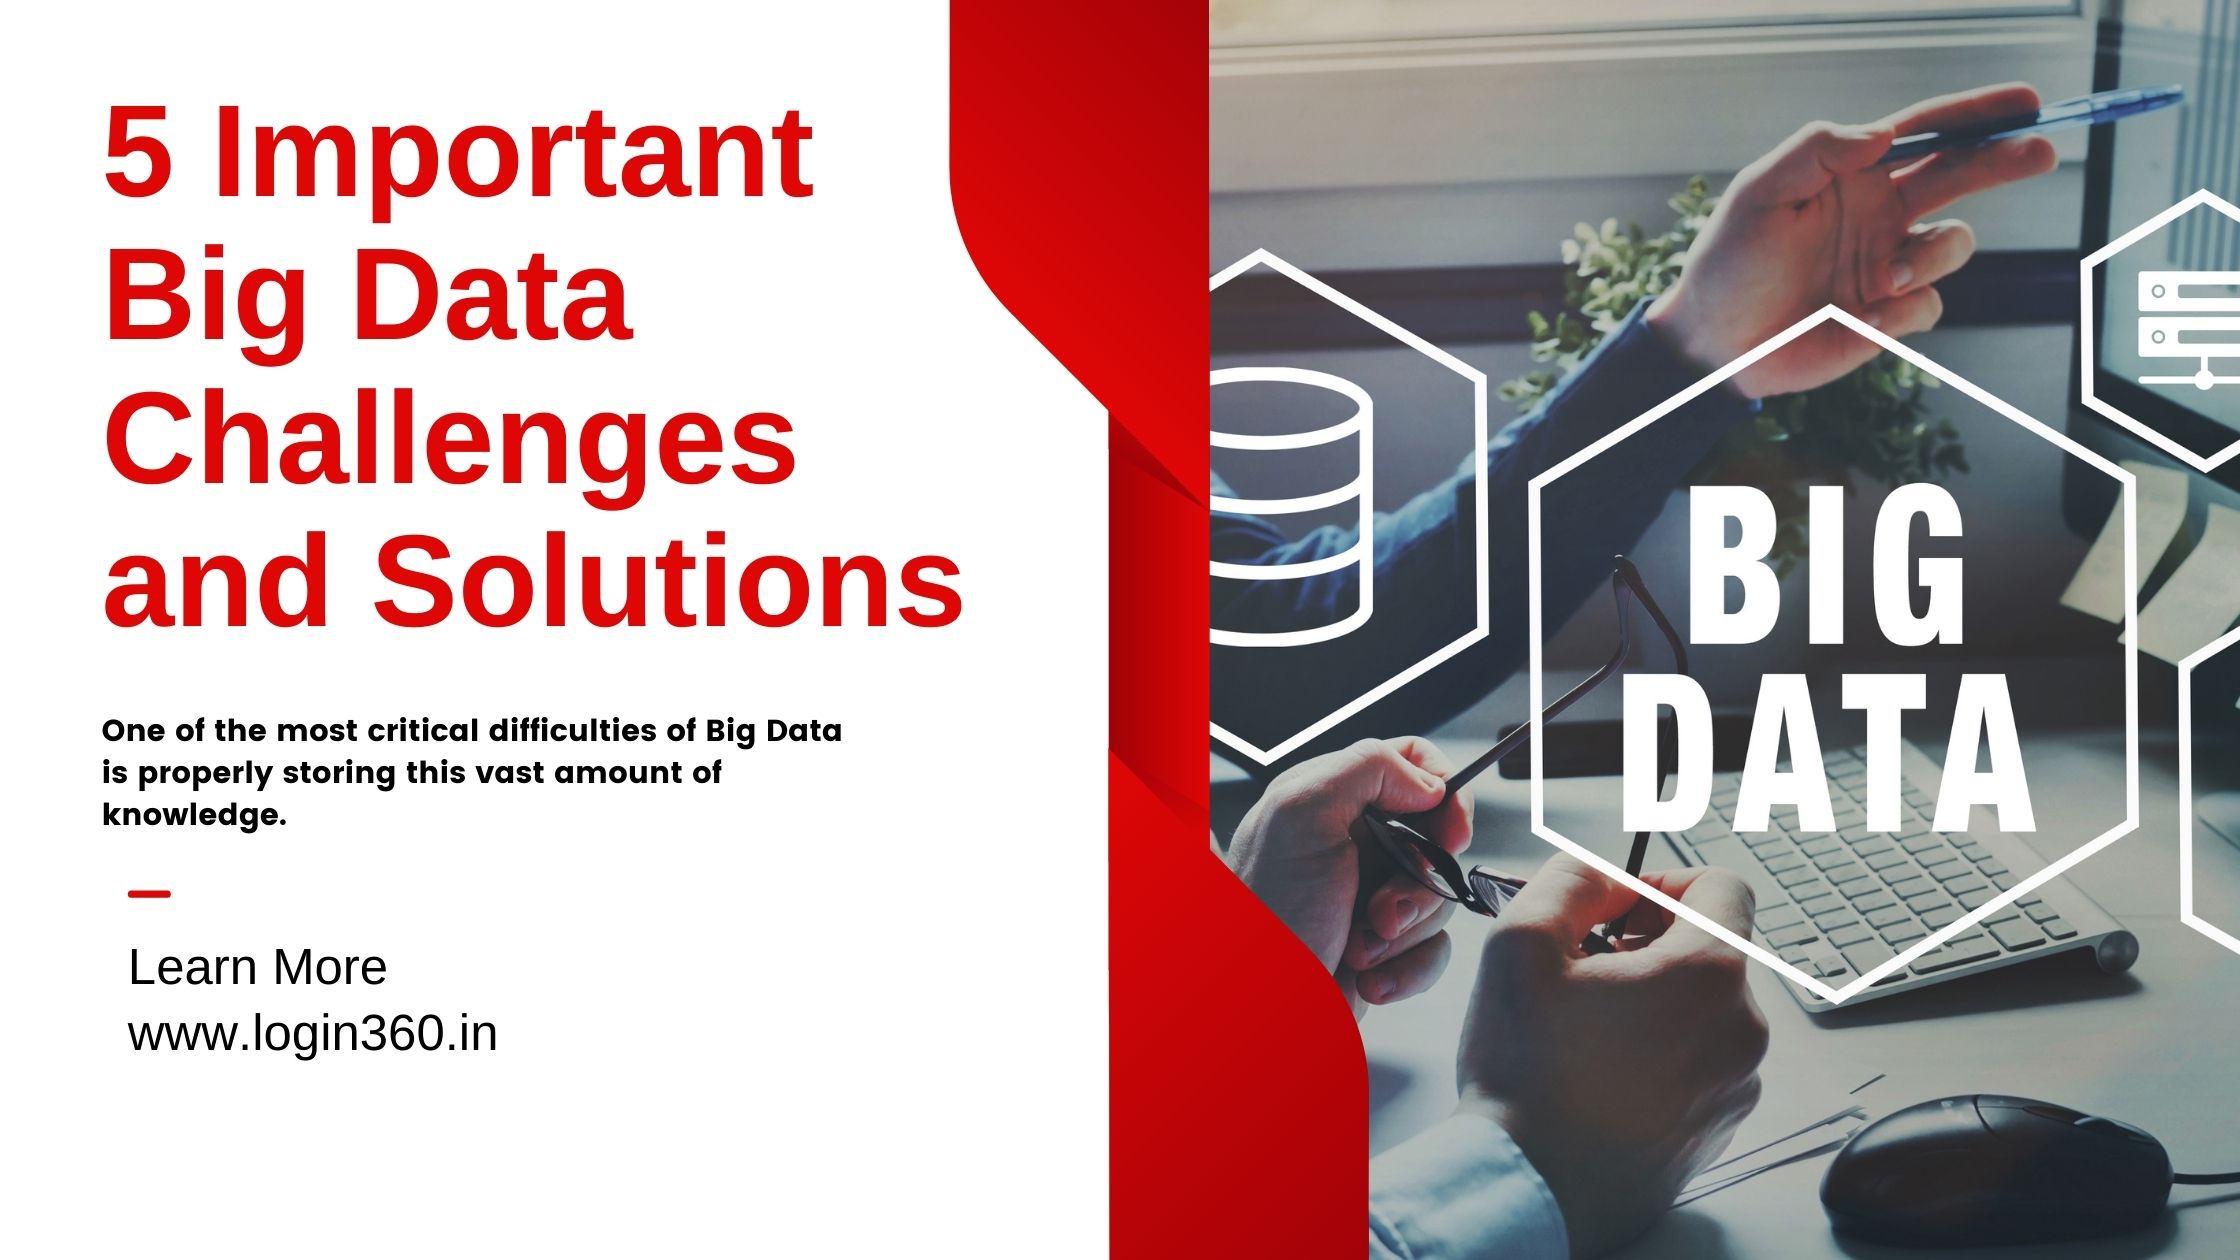 5 Important Big Data Challenges and Solutions